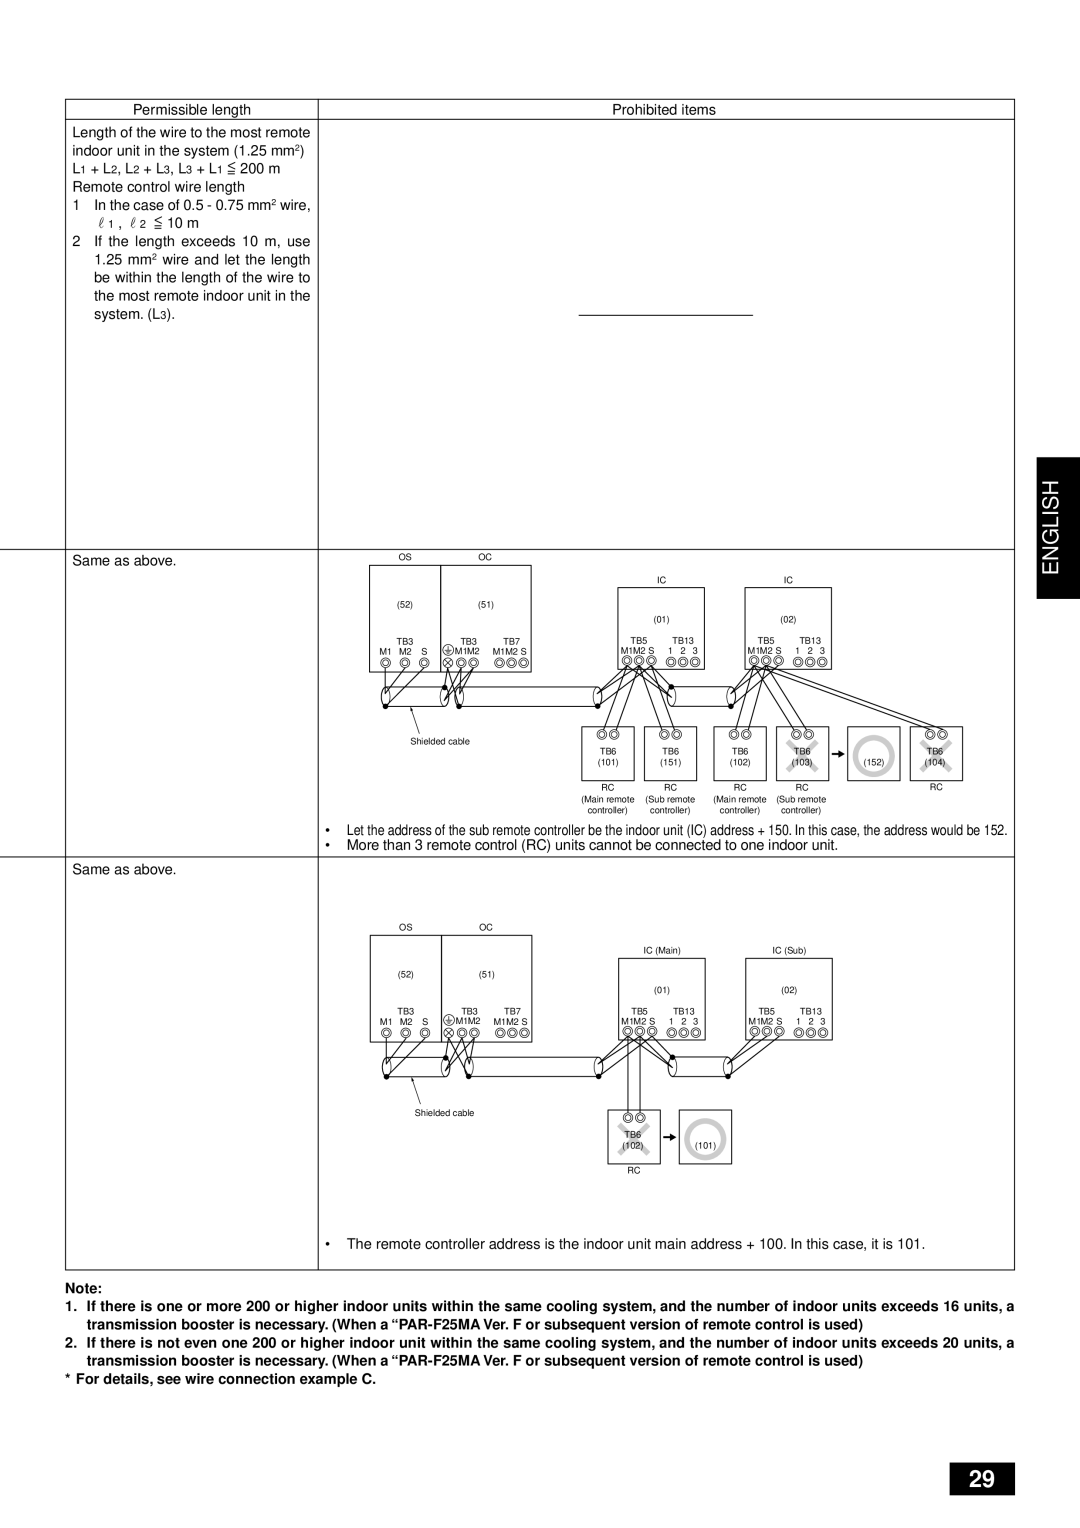 Mitsubishi Electronics PUHY-YMC installation manual English, For details, see wire connection example C 